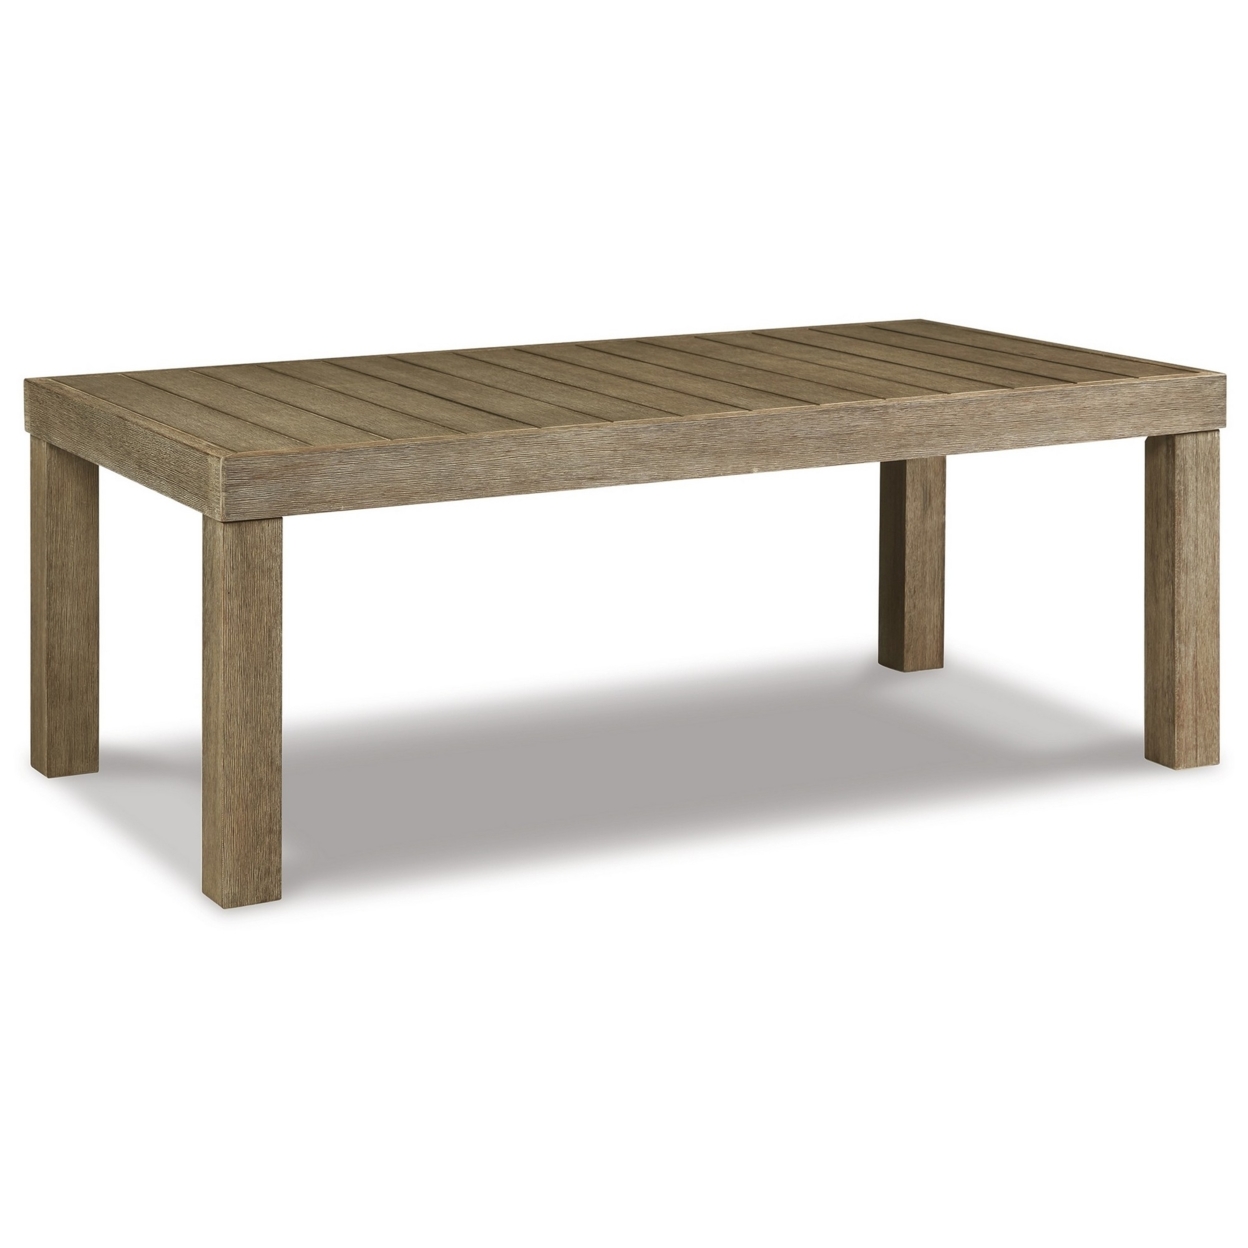 48 Inch Cocktail Coffee Table, Natural Brown Wood, Slatted Style Surface- Saltoro Sherpi